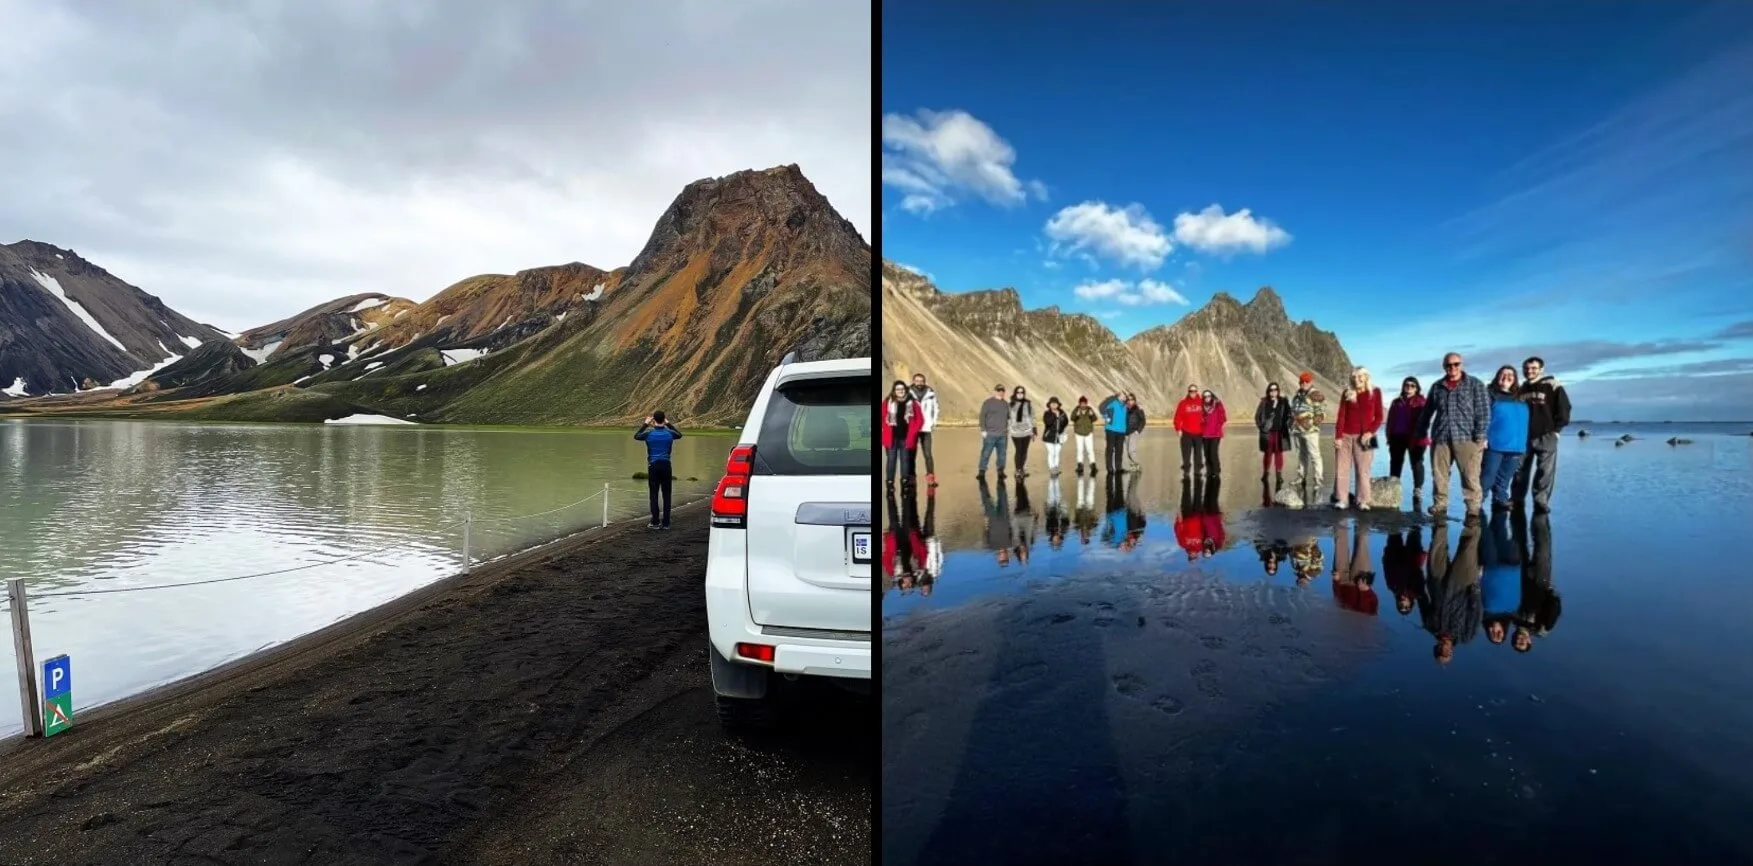 Guided Tours or Rent a Car in Iceland?